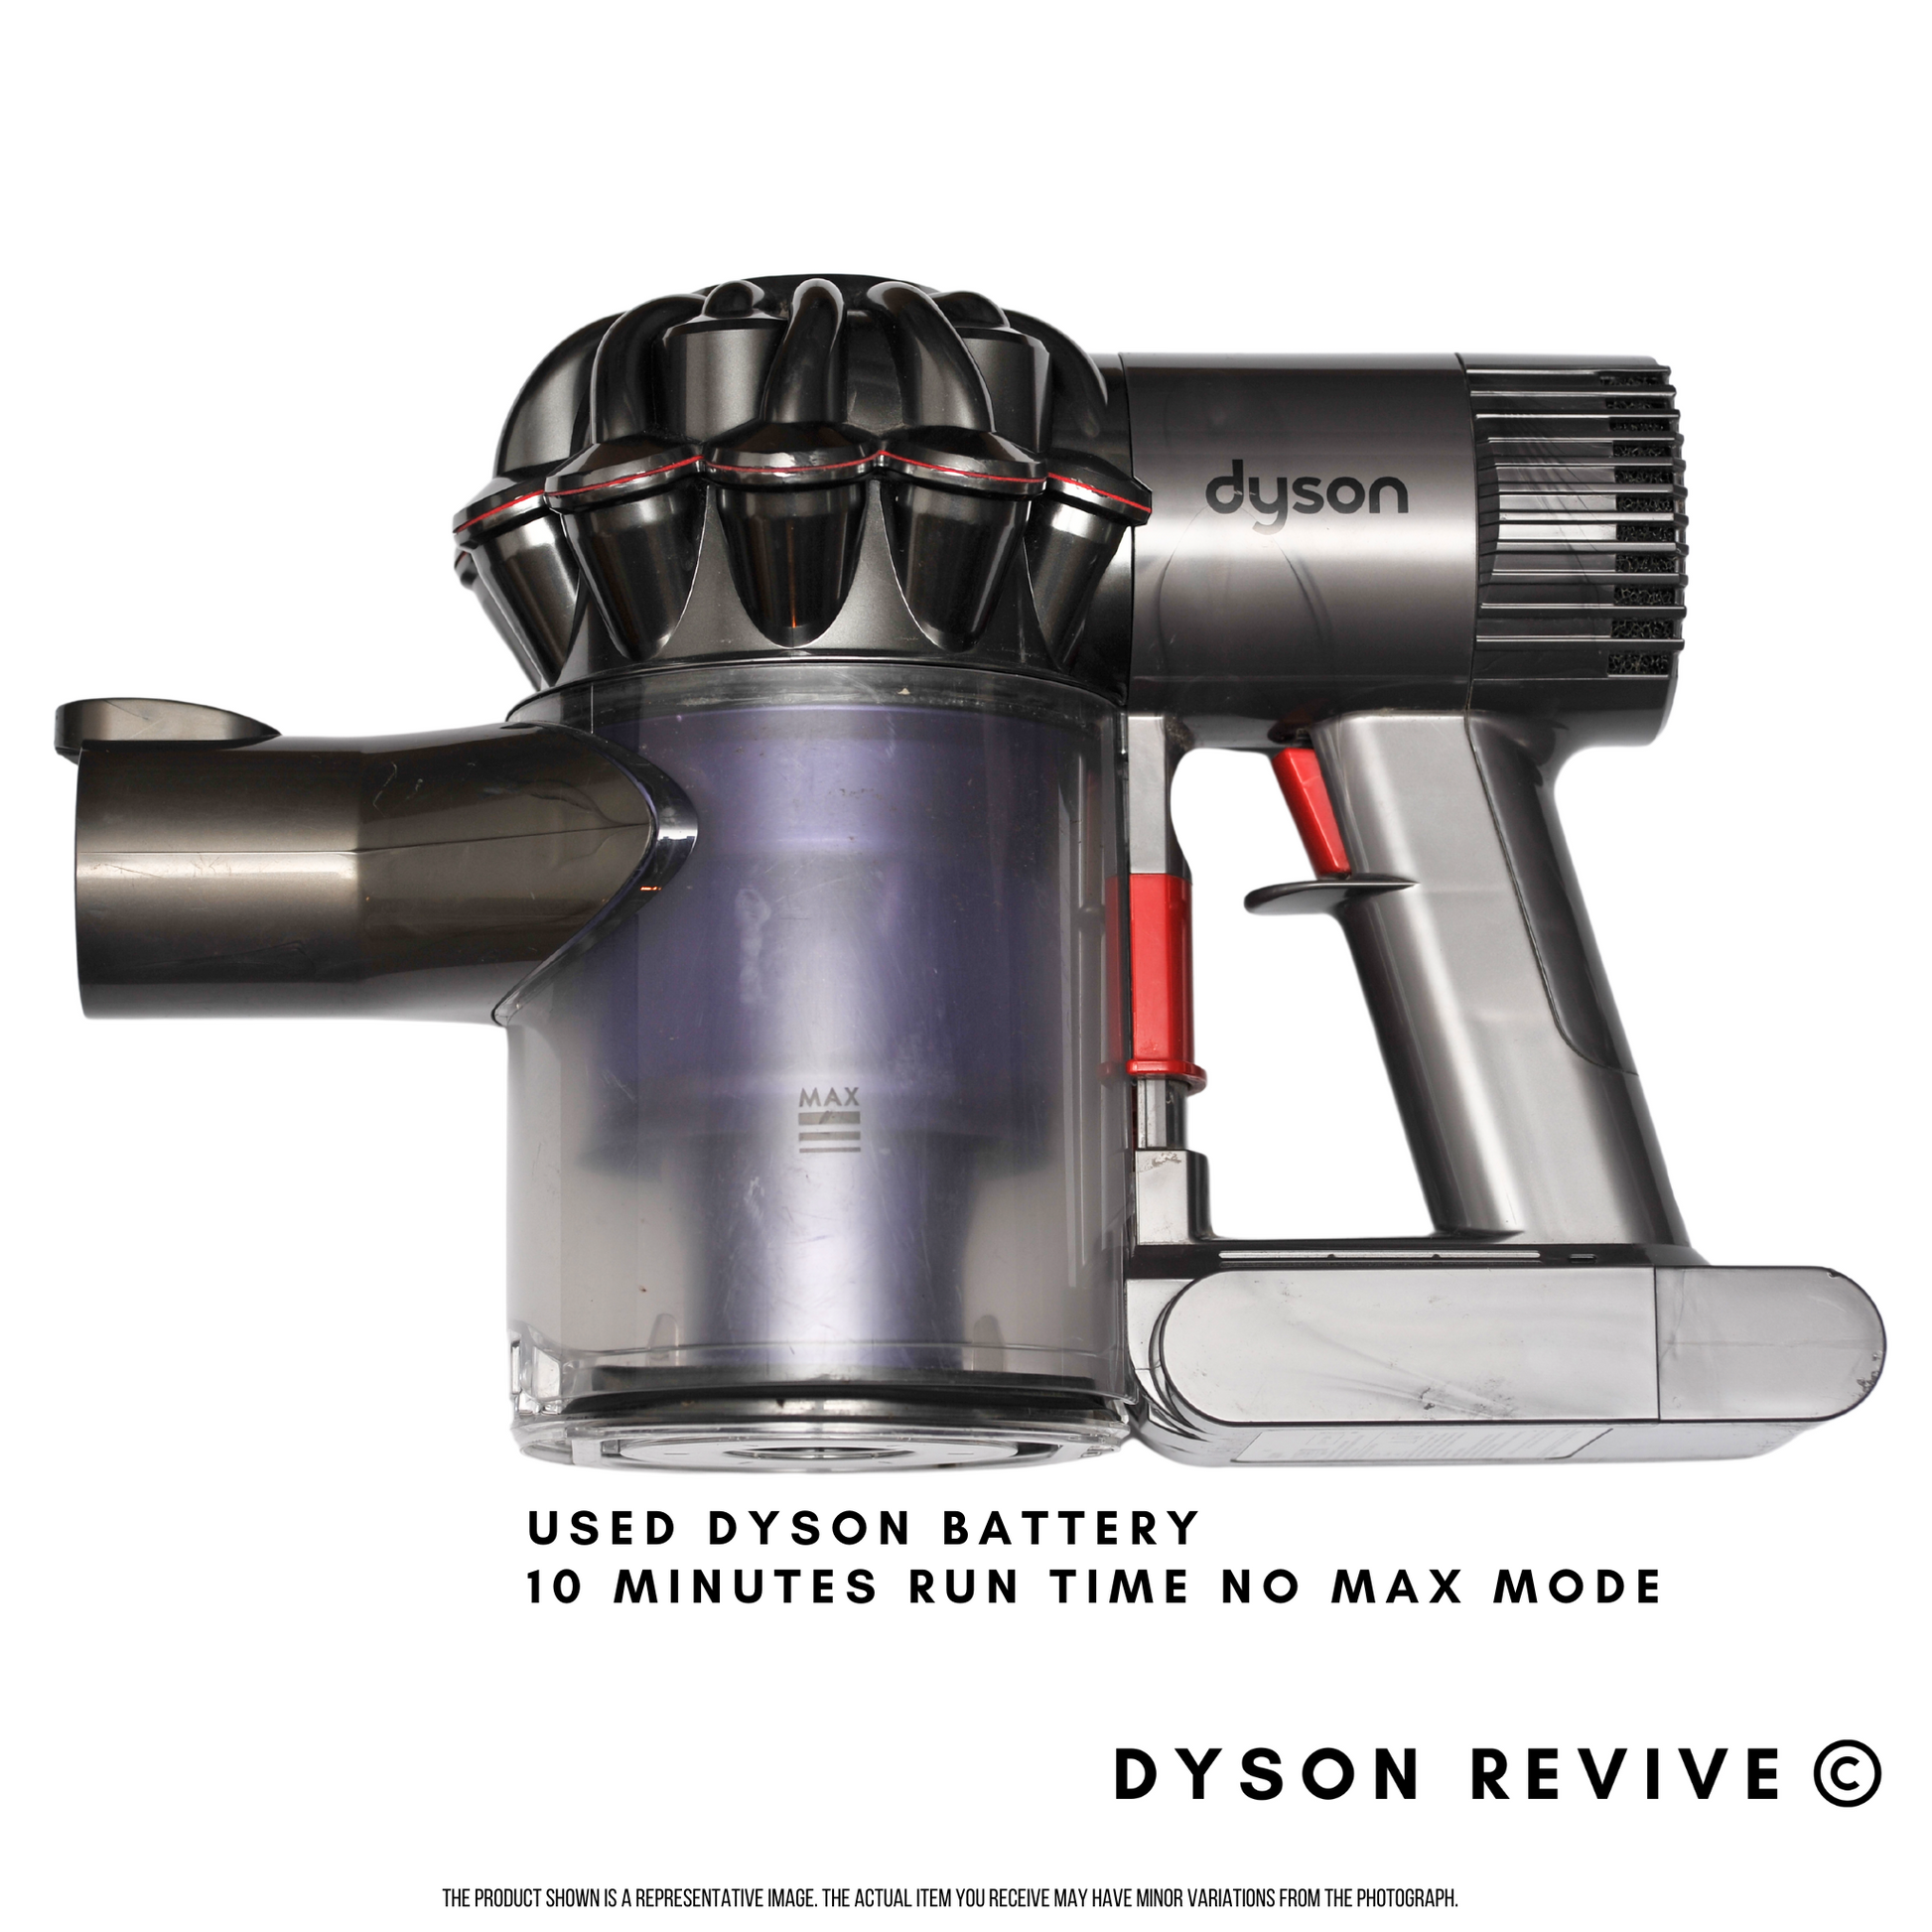 DC59/DC62/DC74/V6 Dyson Vacuum/Motor/Dustbuster/Car Handheld Vacuum with Used Dyson Battery - Dyson Revive